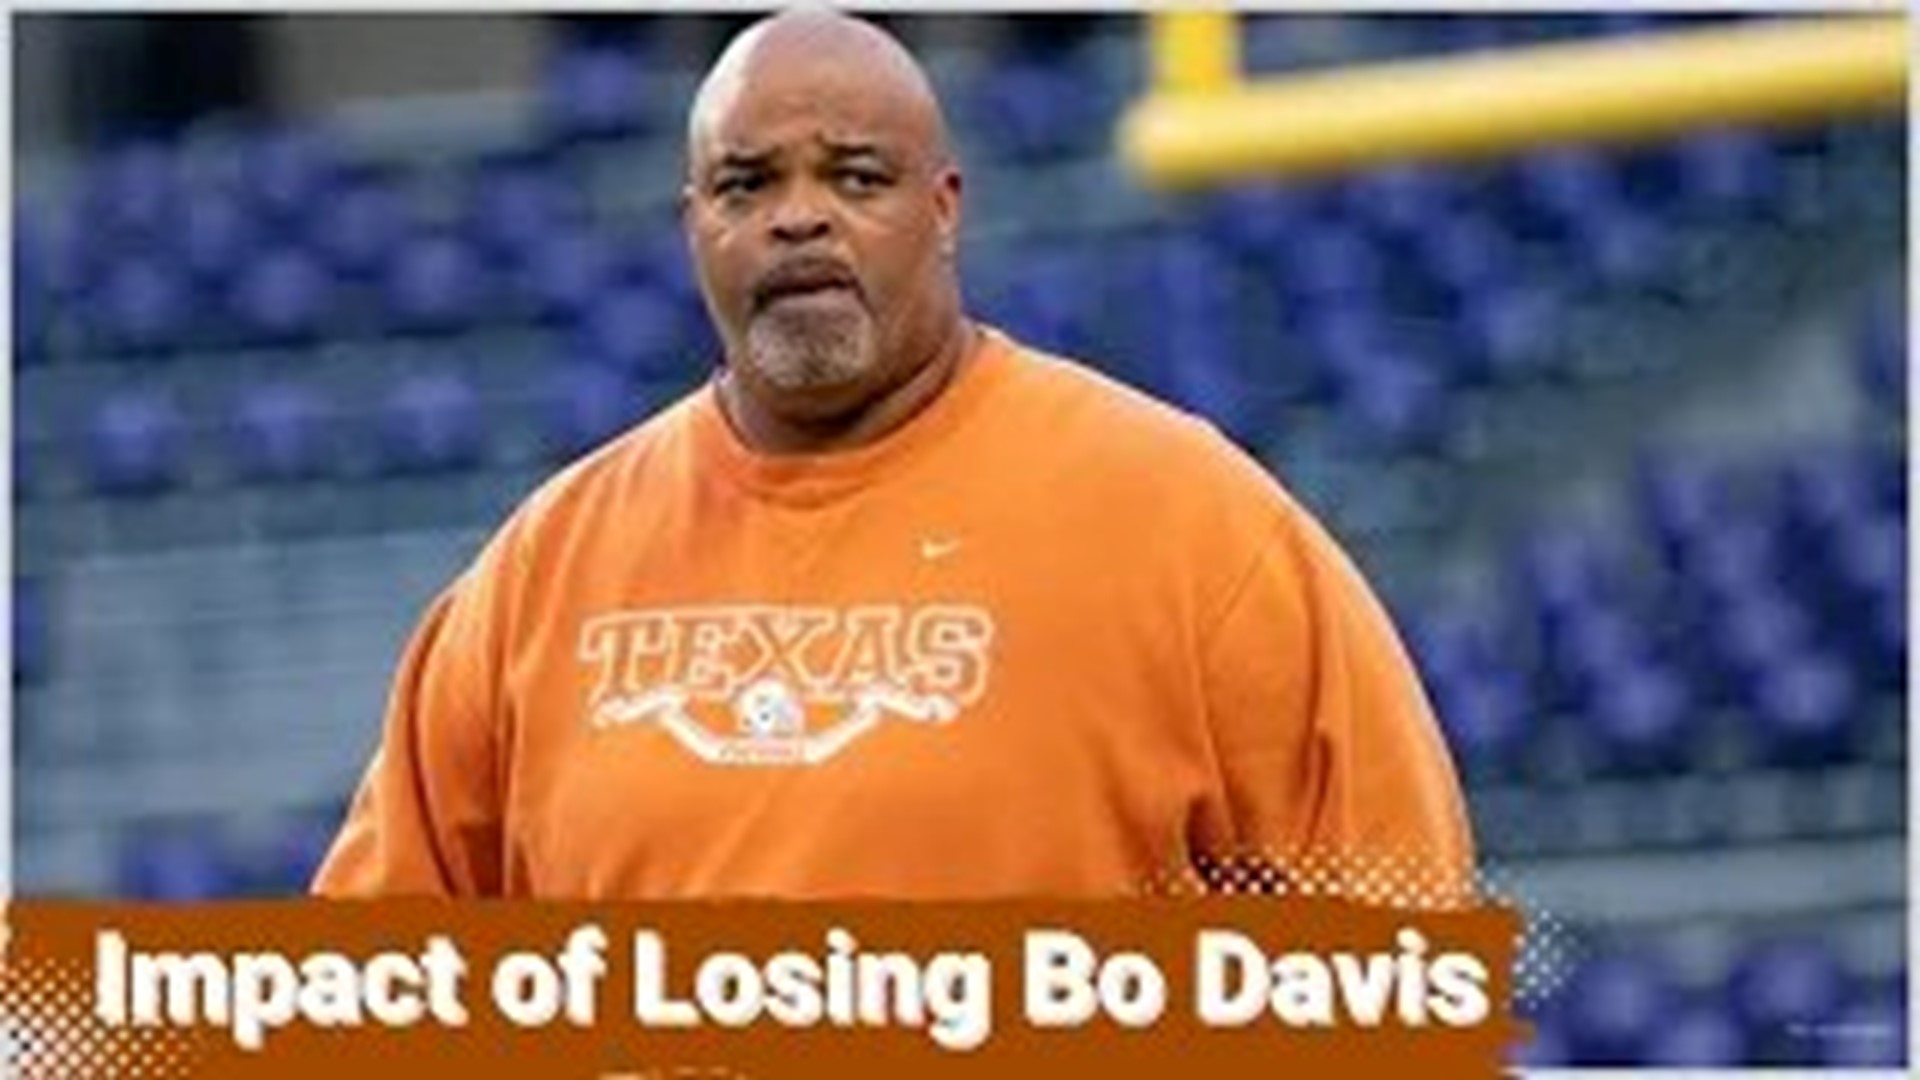 On January 10th of 2024, legendary defensive line coach Bo Davis decided to leave the University of Texas to return to his Alma Mater, Louisiana State University.